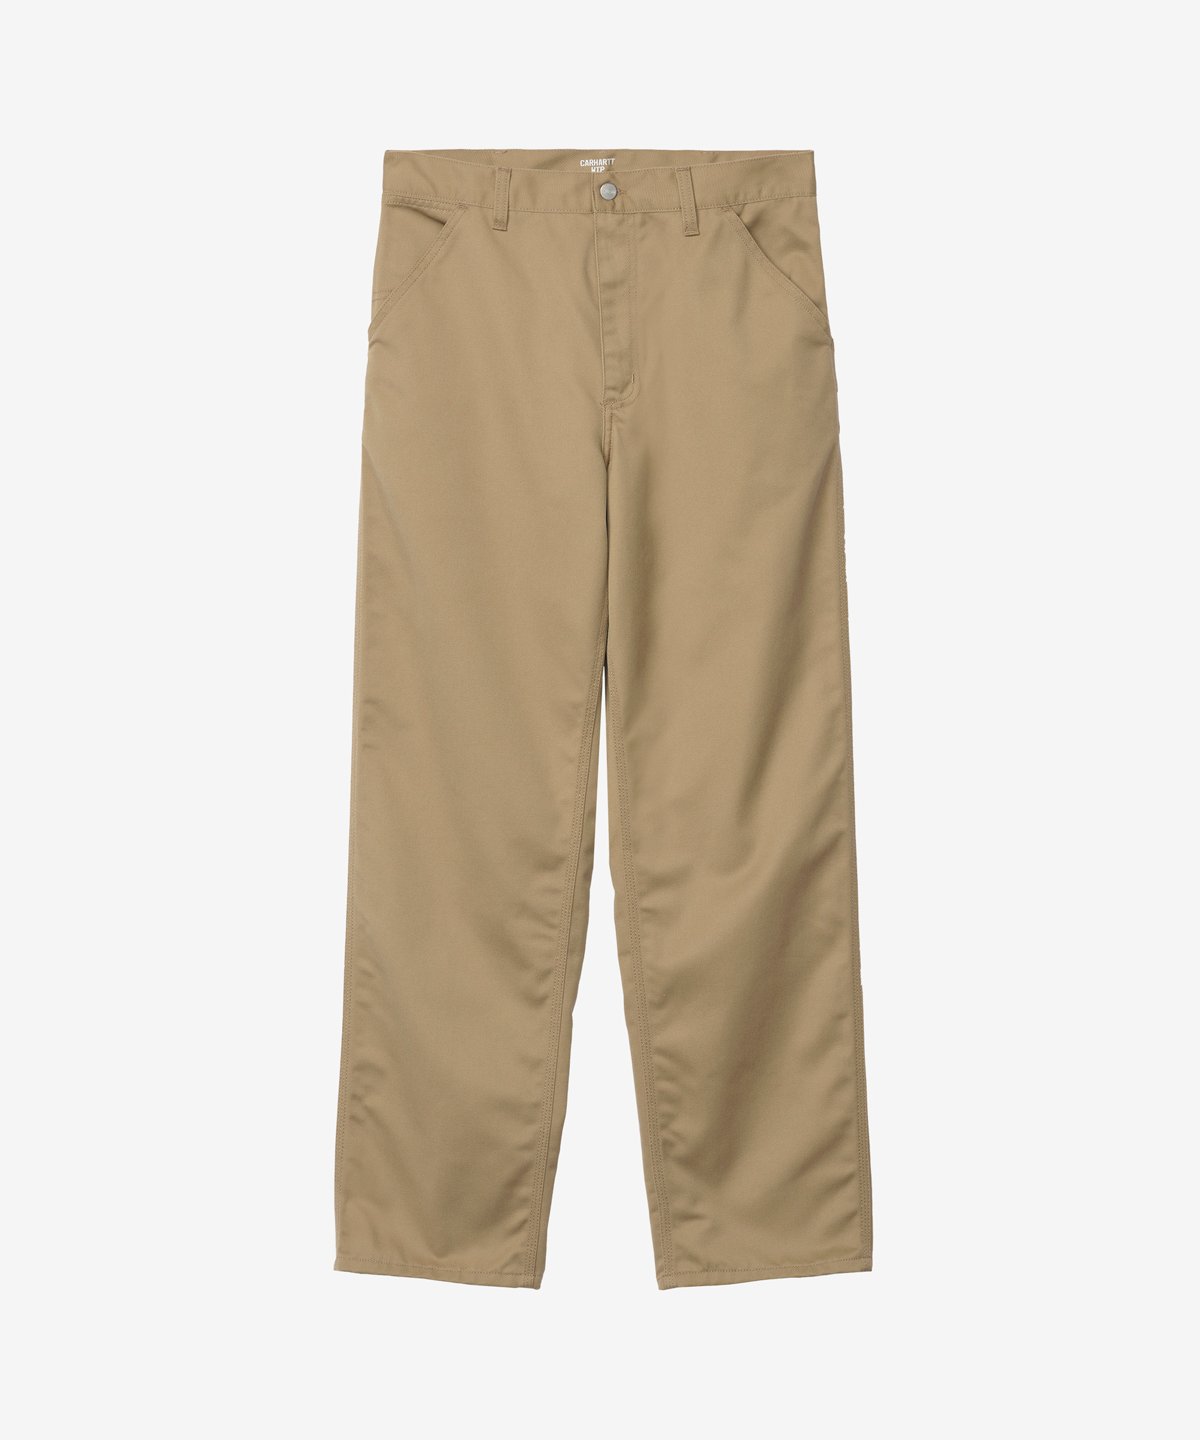 CARHARTT WIP_SIMPLE PANT :::LEATHER::: | SILO